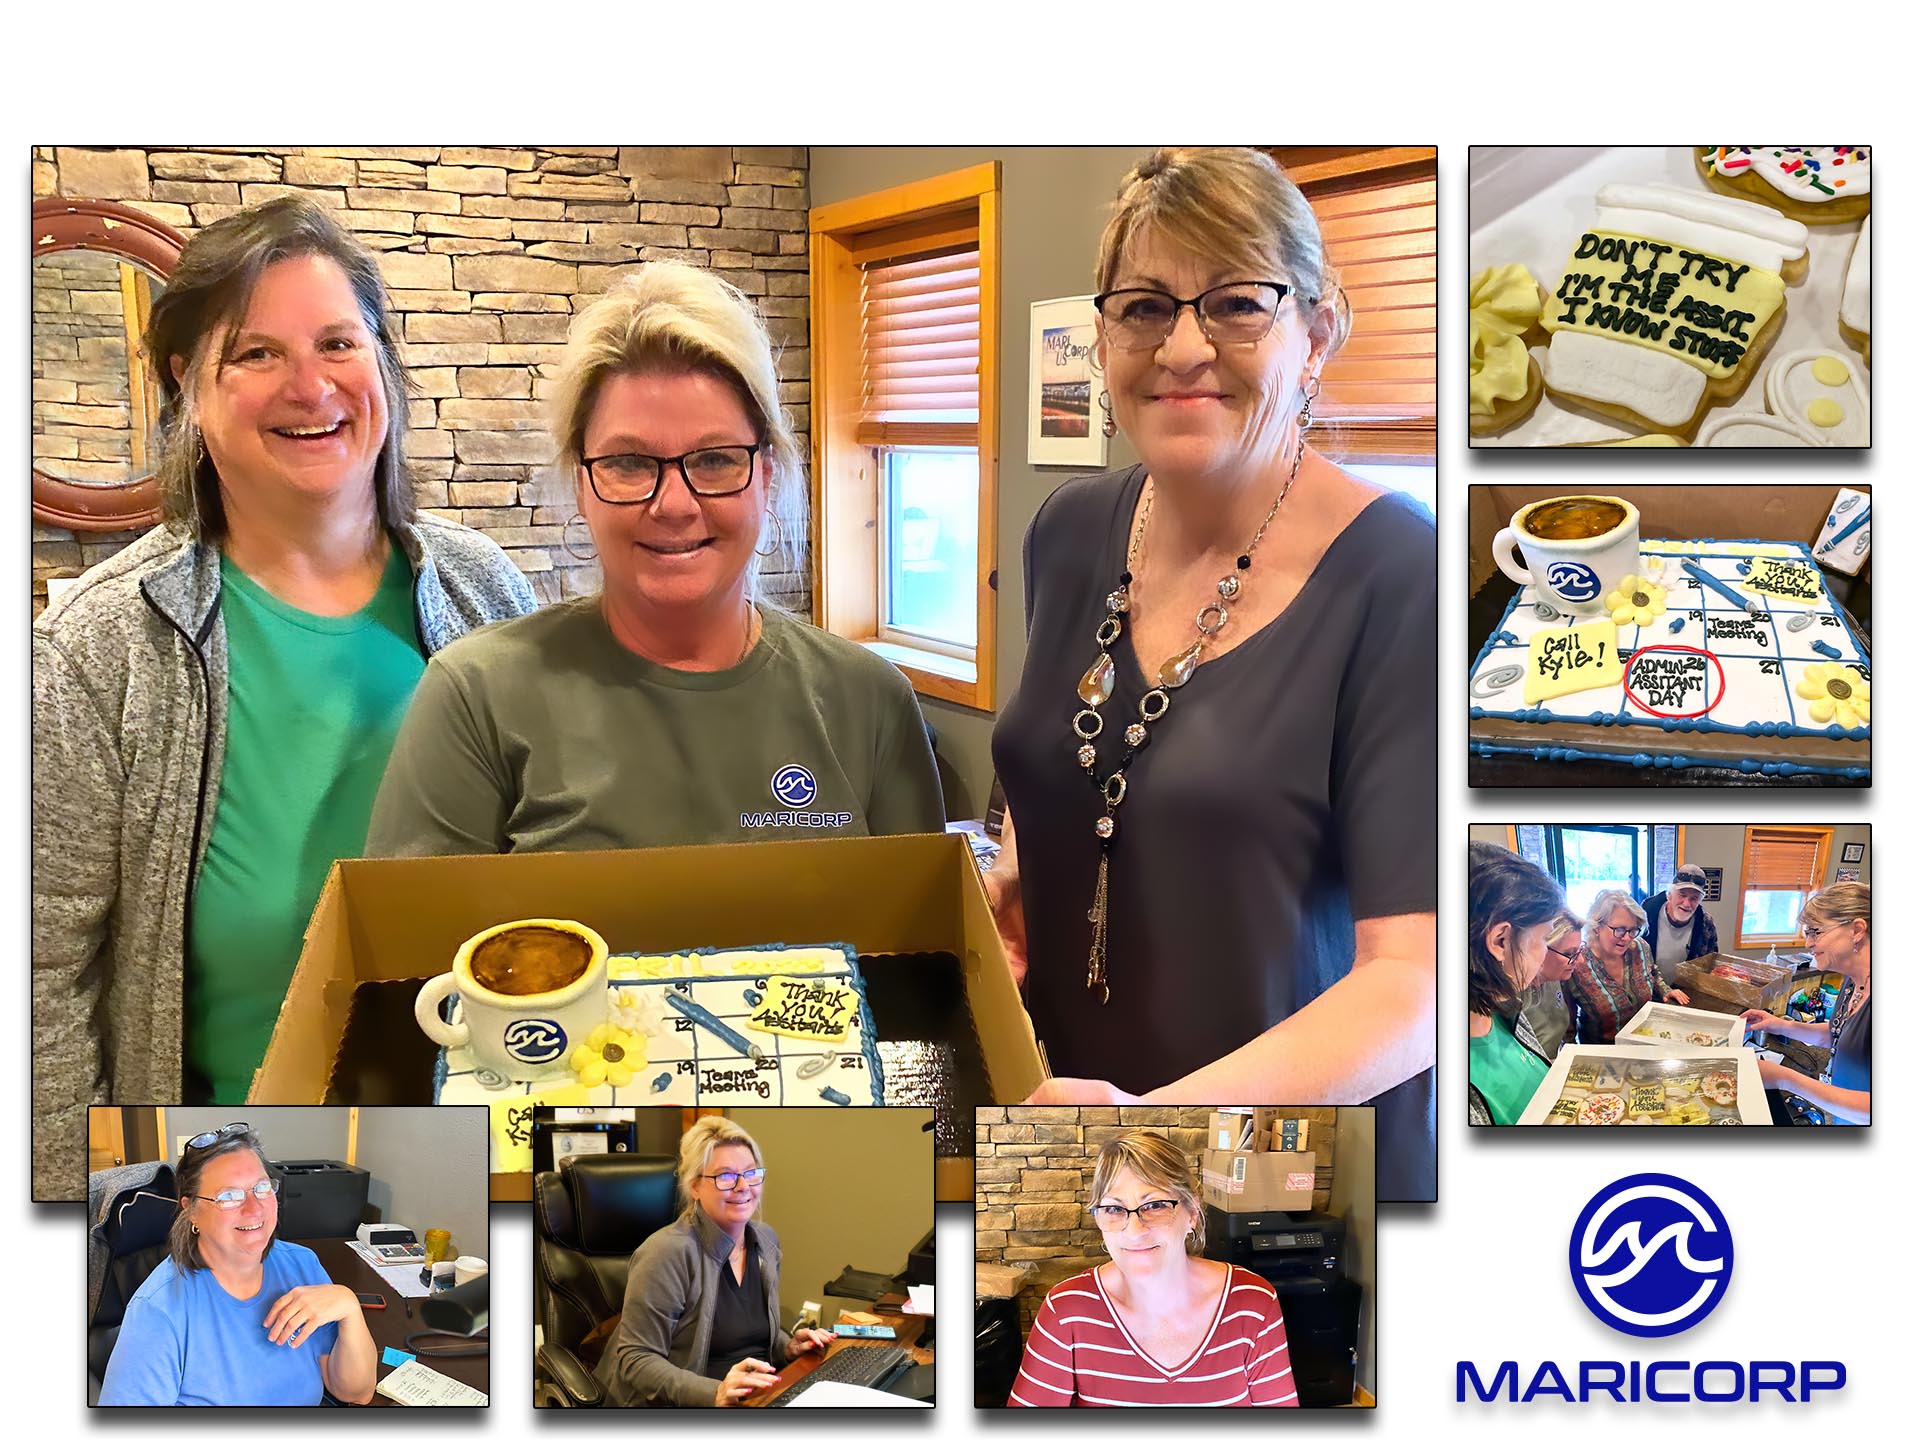 Celebrating Administrative Professionals Day at MariCorp